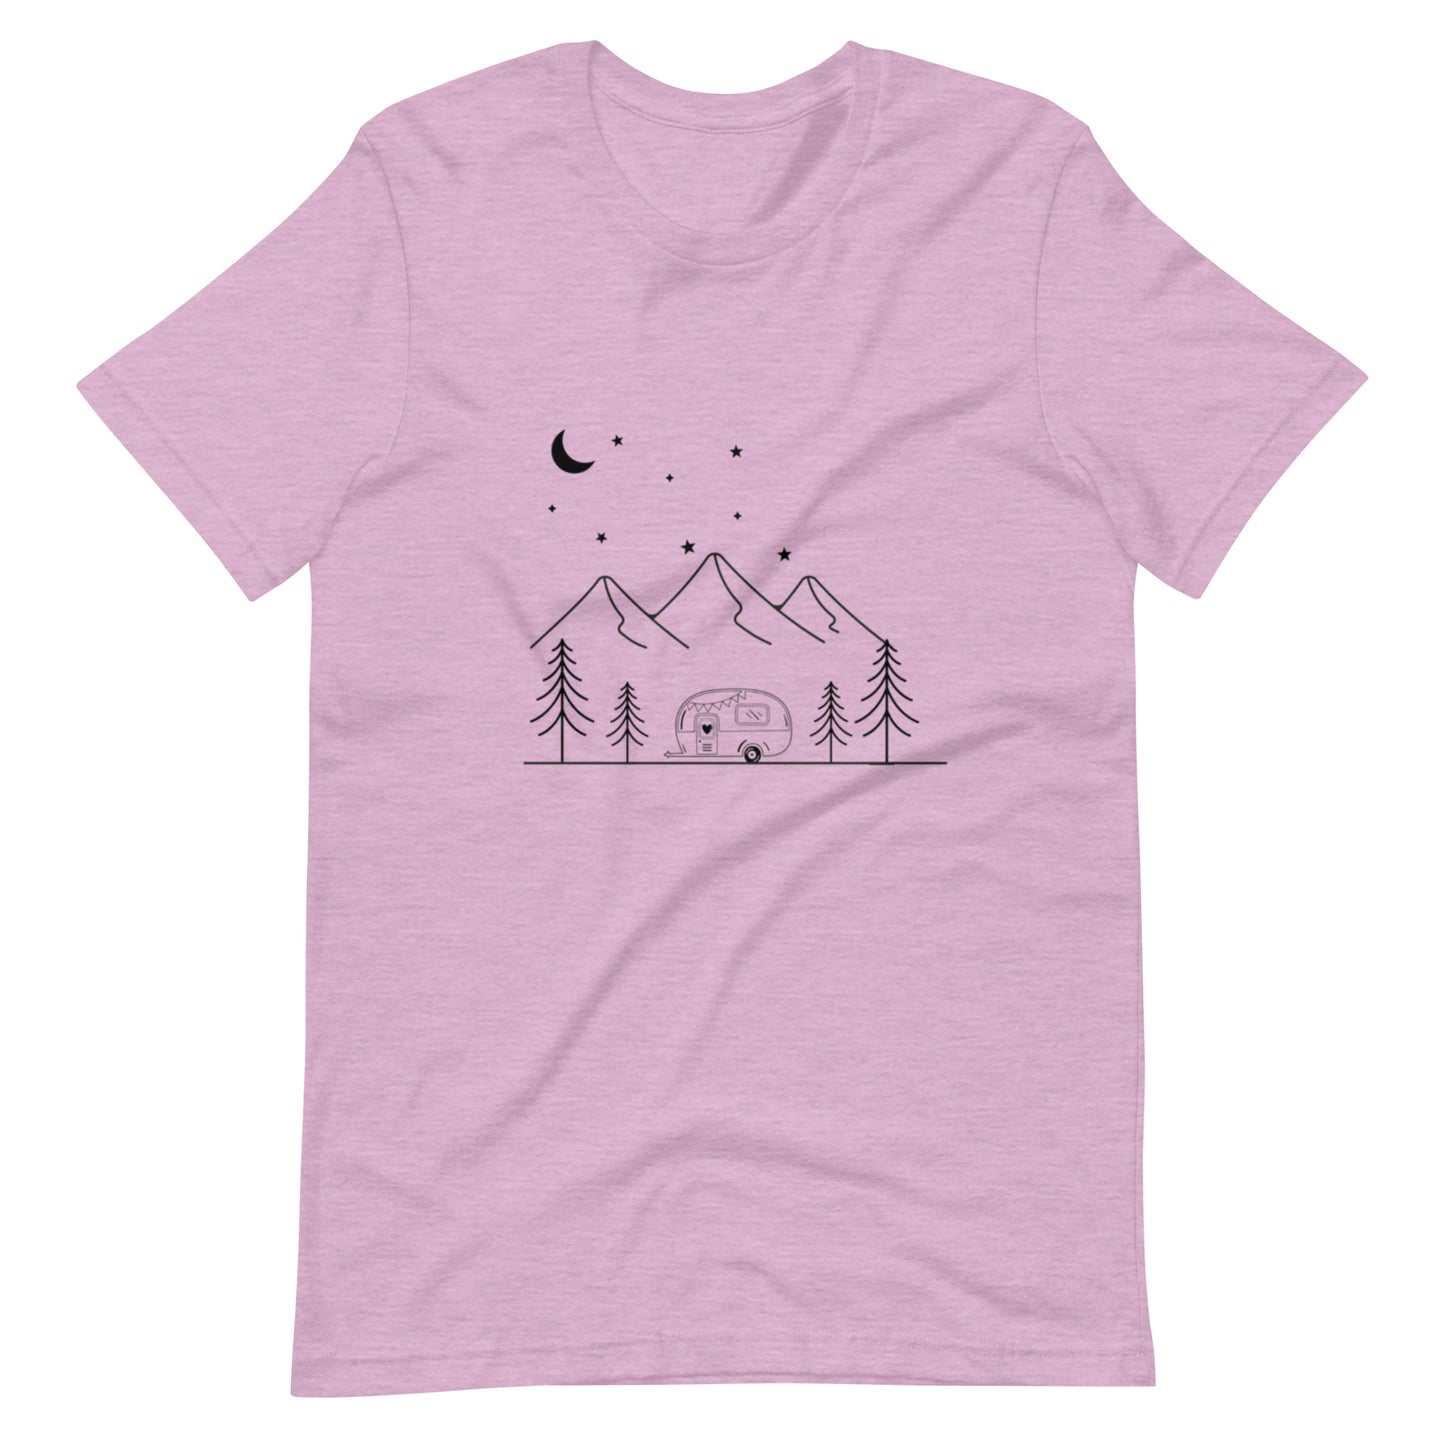 Campers Coffee Graphic tee Camper mountains